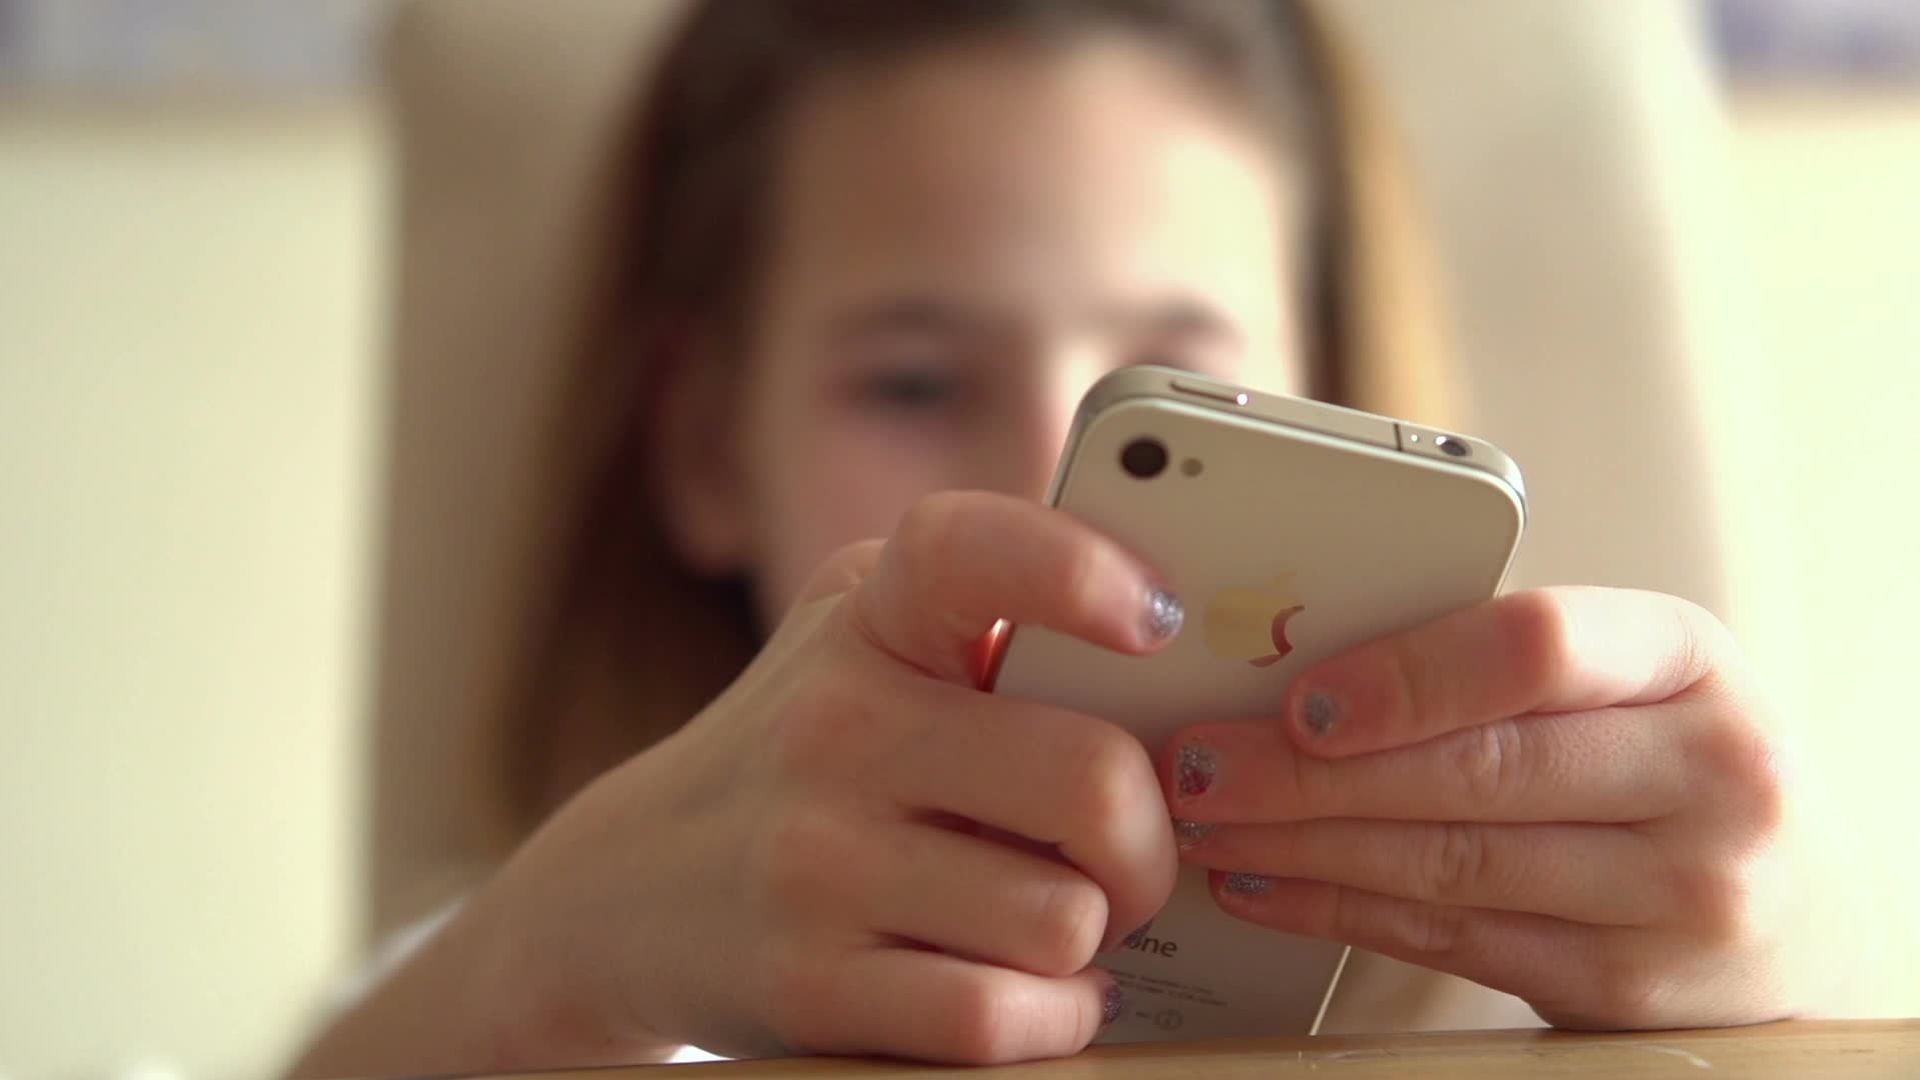 Can I Lock My Child's iPhone Remotely?